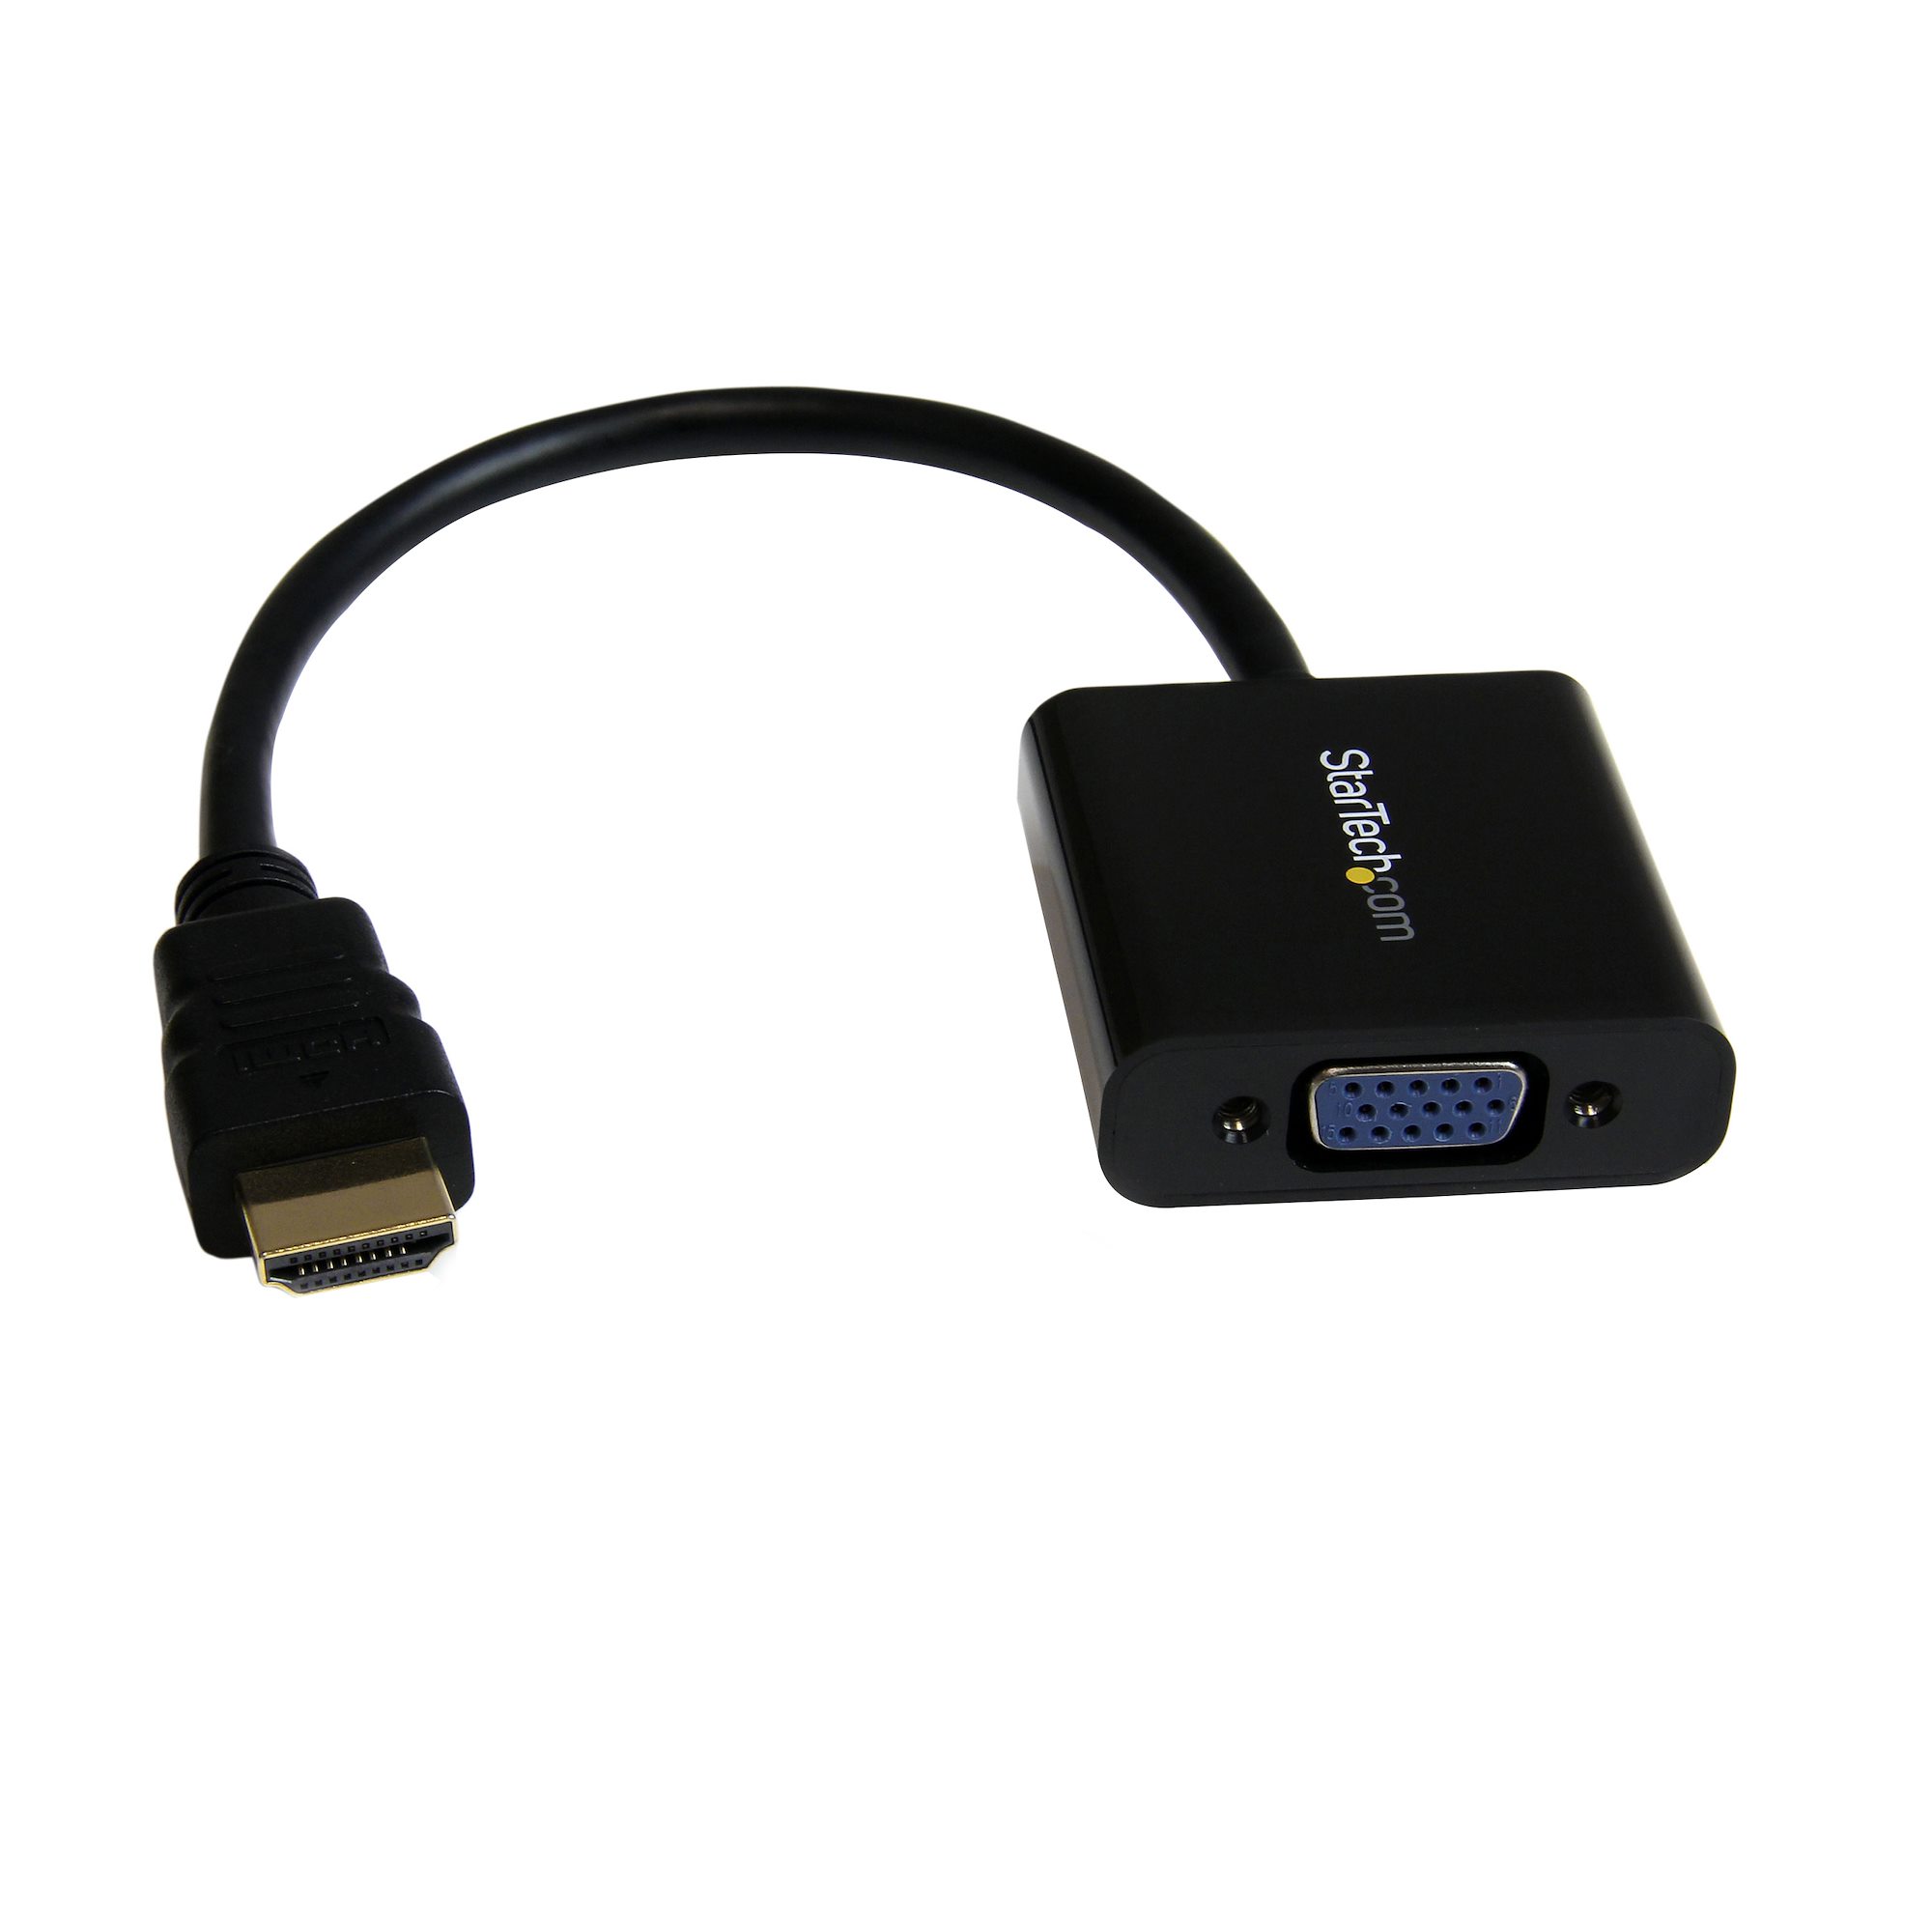 Gaseous football piston HDMI to VGA Adapter - HDMI® and DVI Video Adapters | StarTech.com